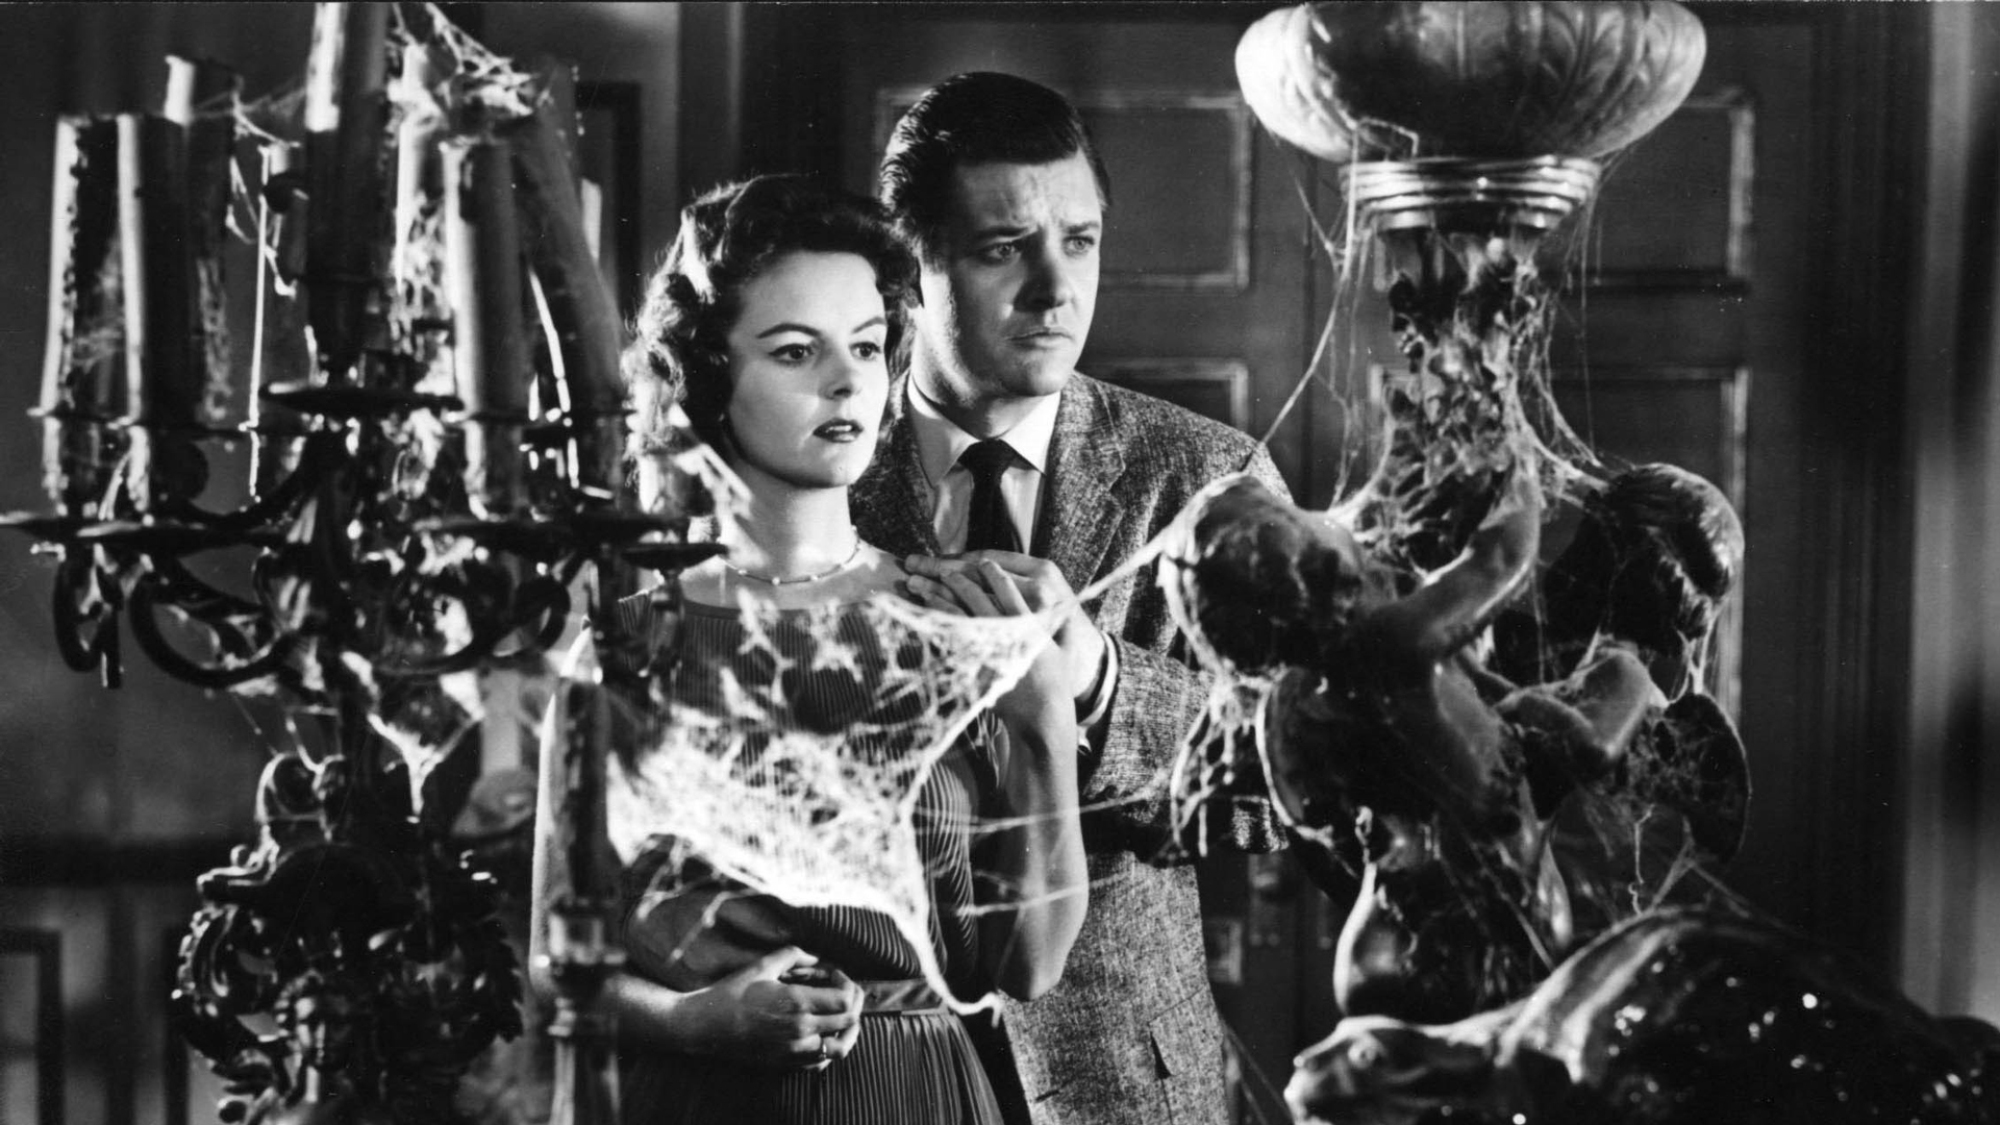 A man and woman stand looking at old lamps covered in cobwebs.